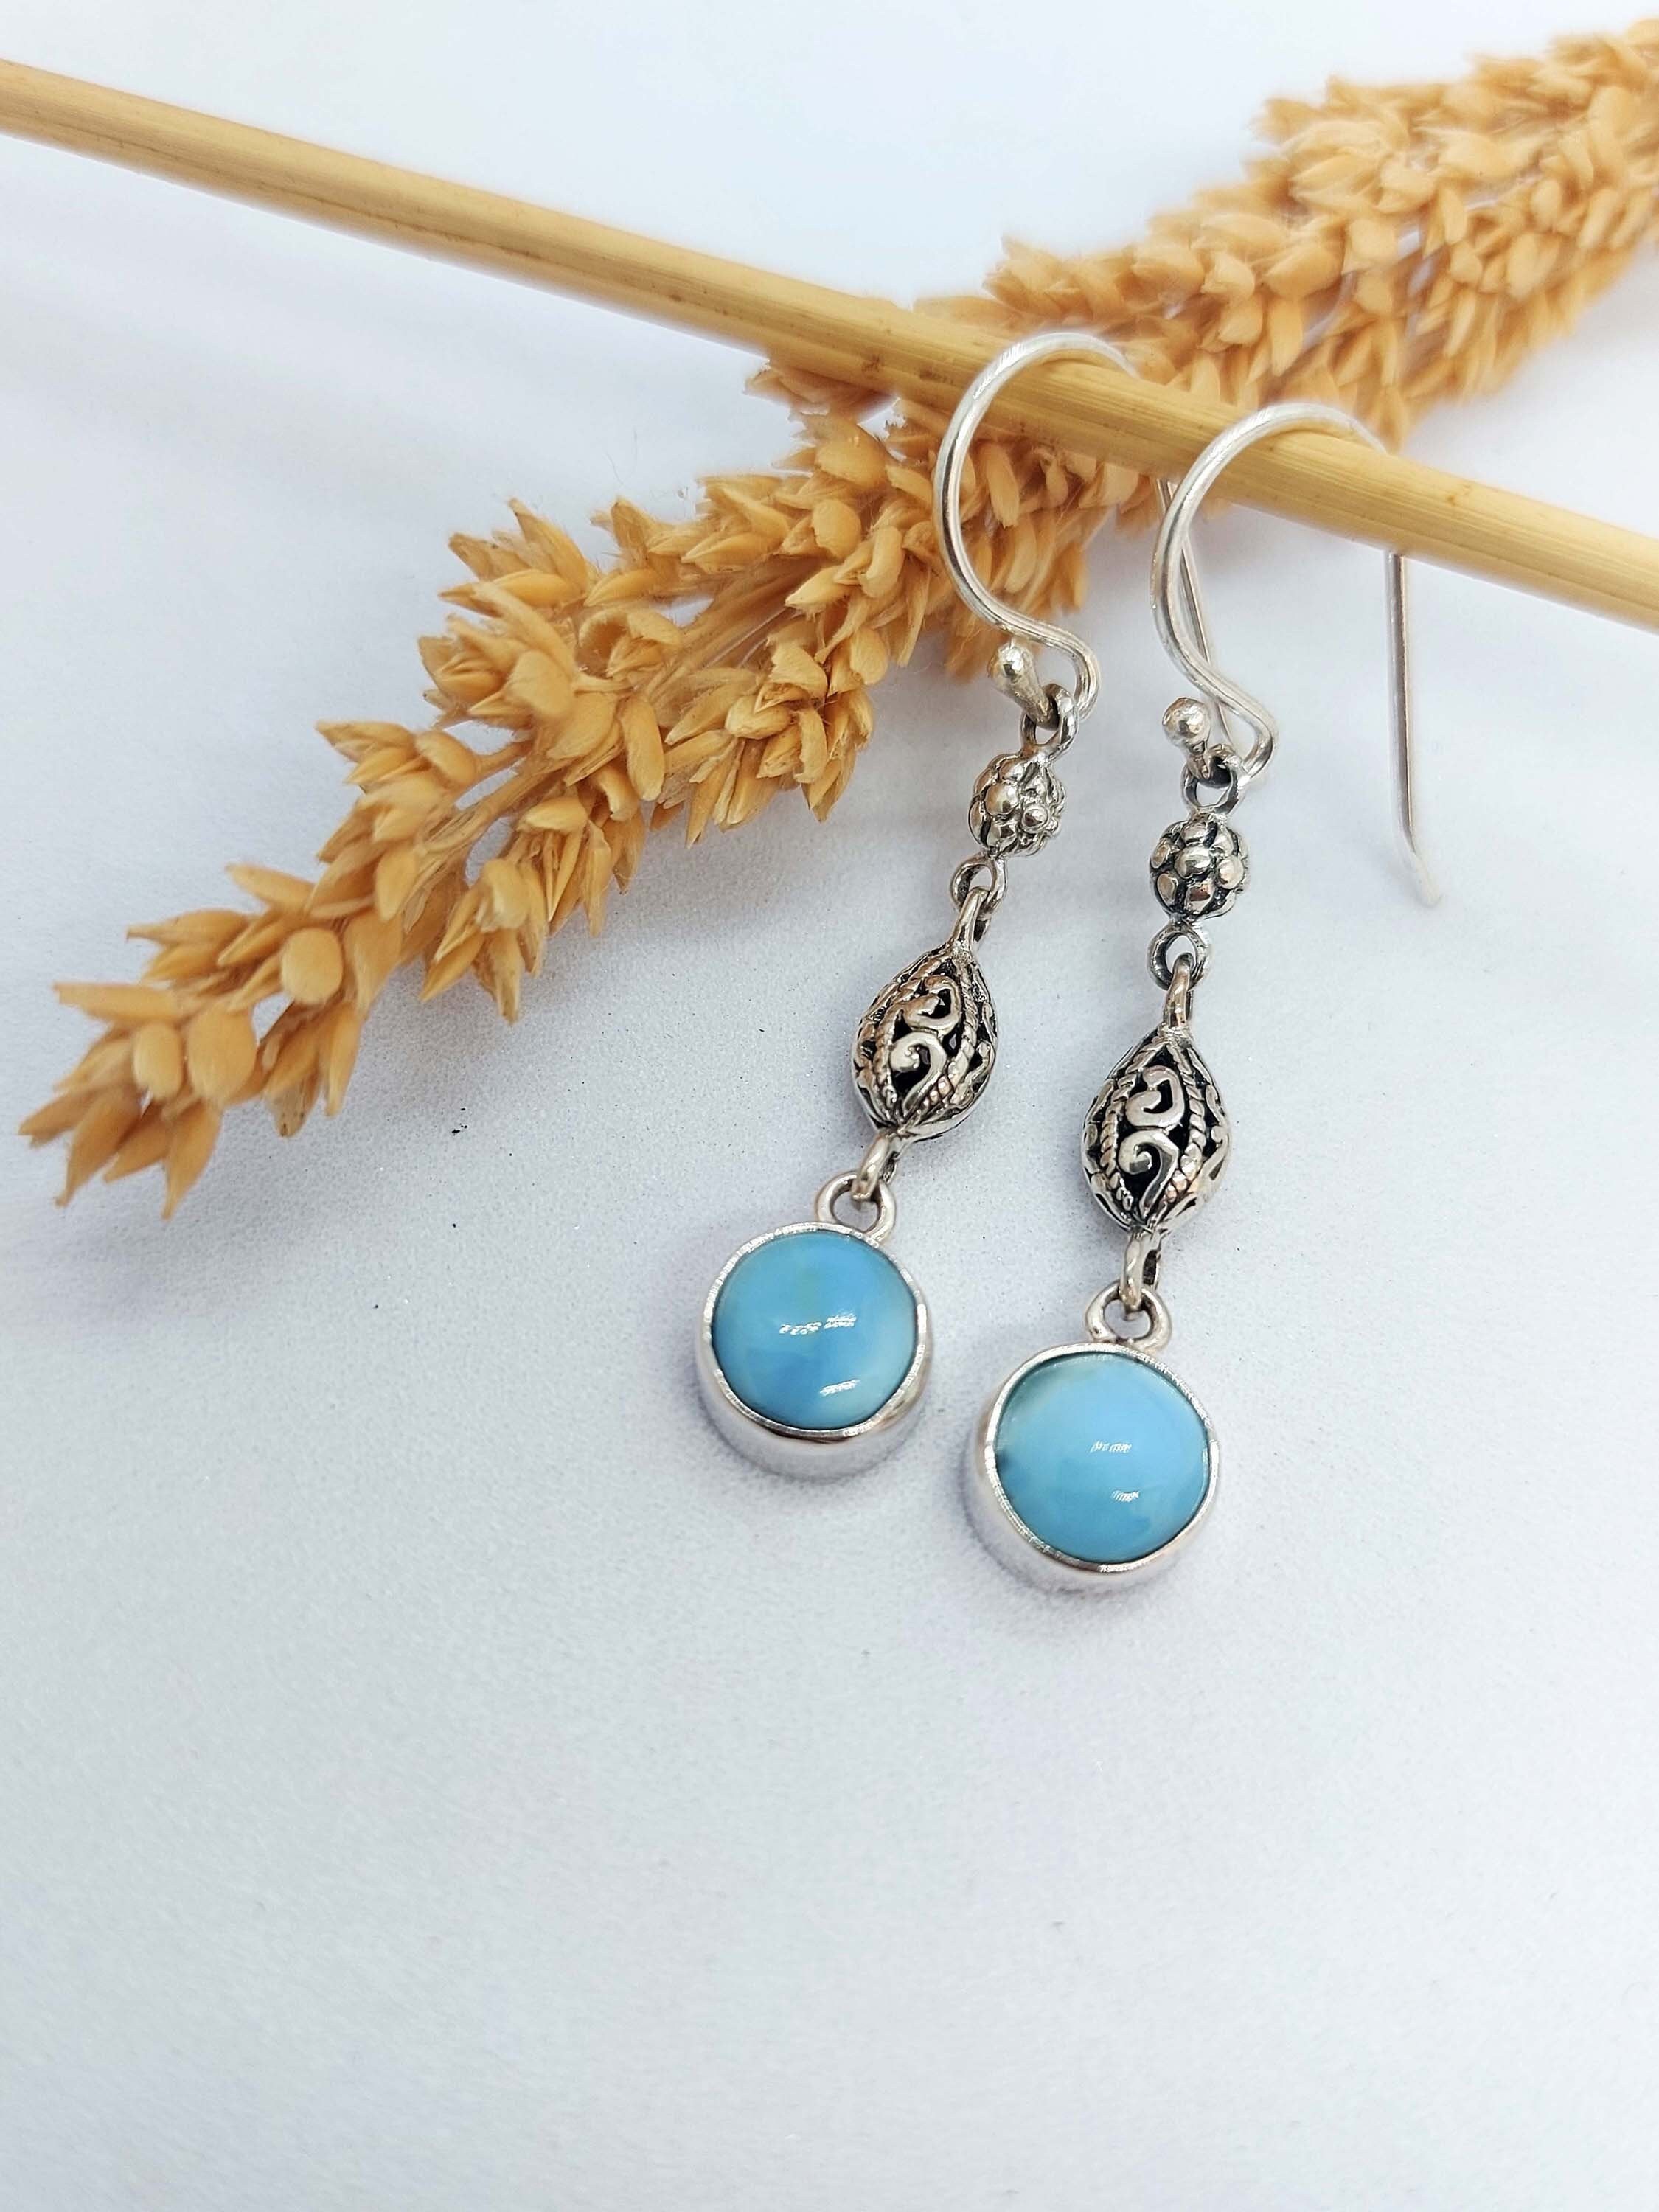 Stunning Silver Earrings With Blue Larimar Stone Beautiful 